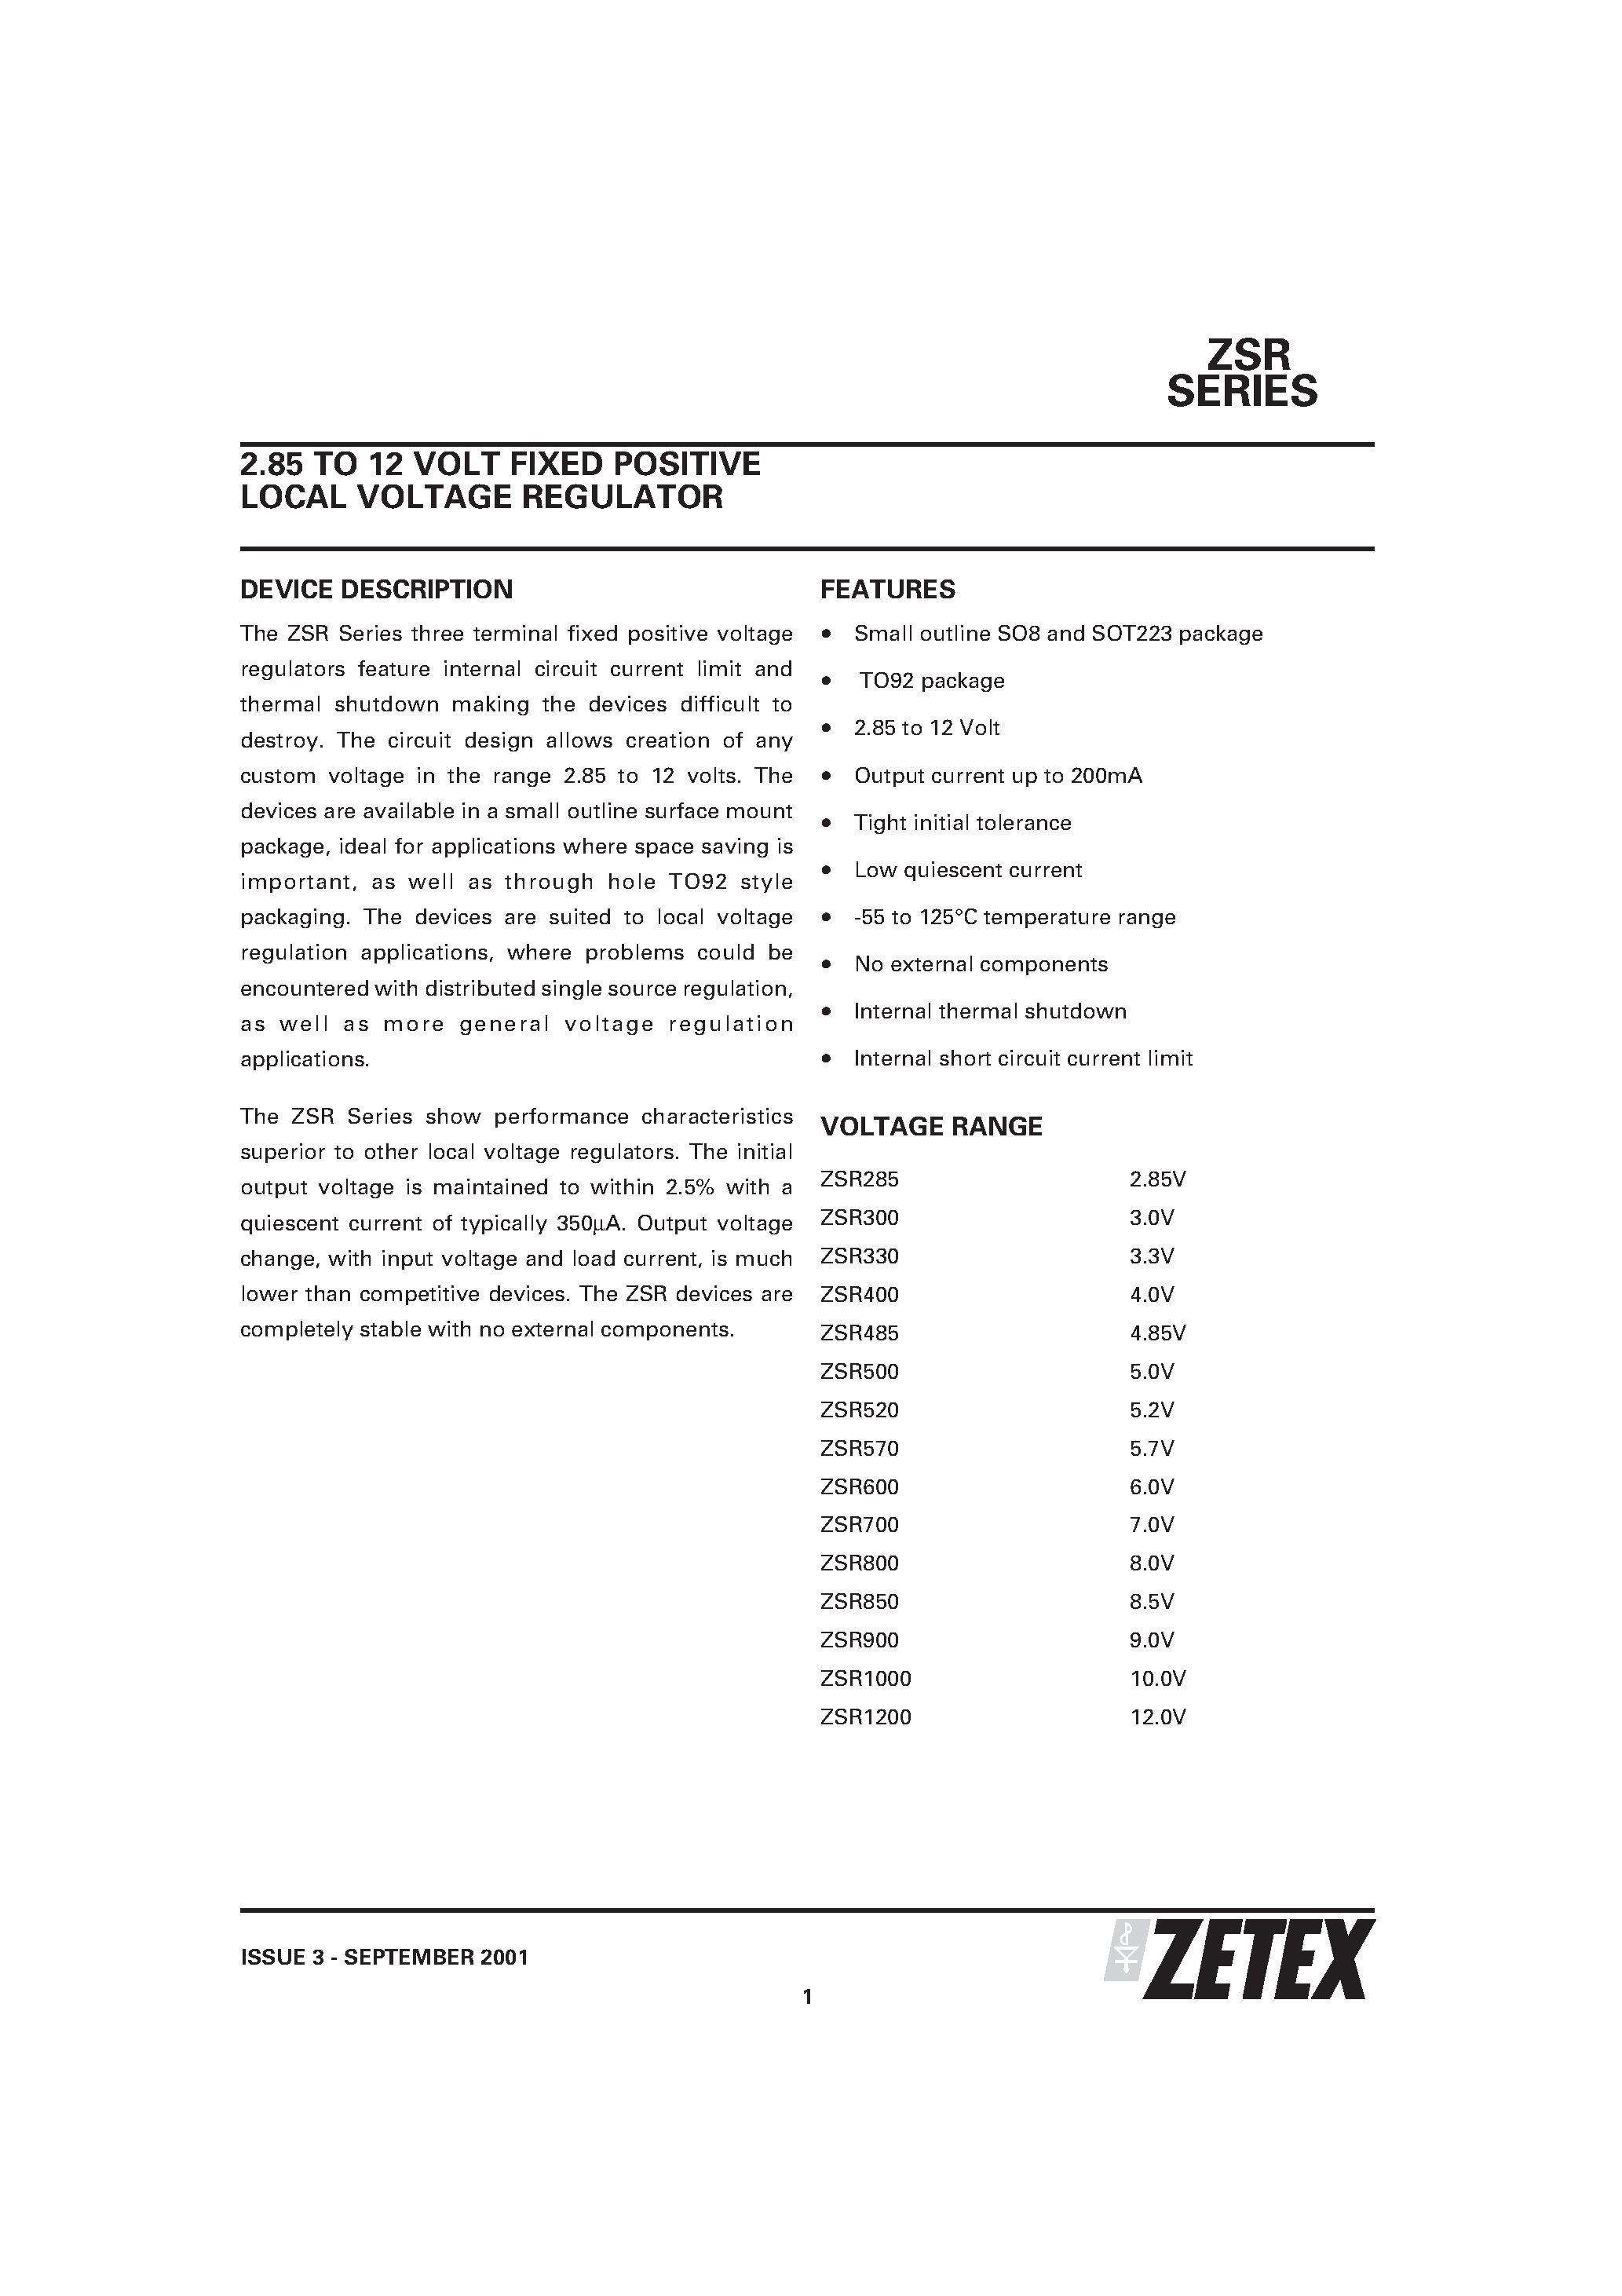 Datasheet ZSR300 - 2.85 TO 12 VOLT FIXED POSITIVE LOCAL VOLTAGE REGULATOR page 1